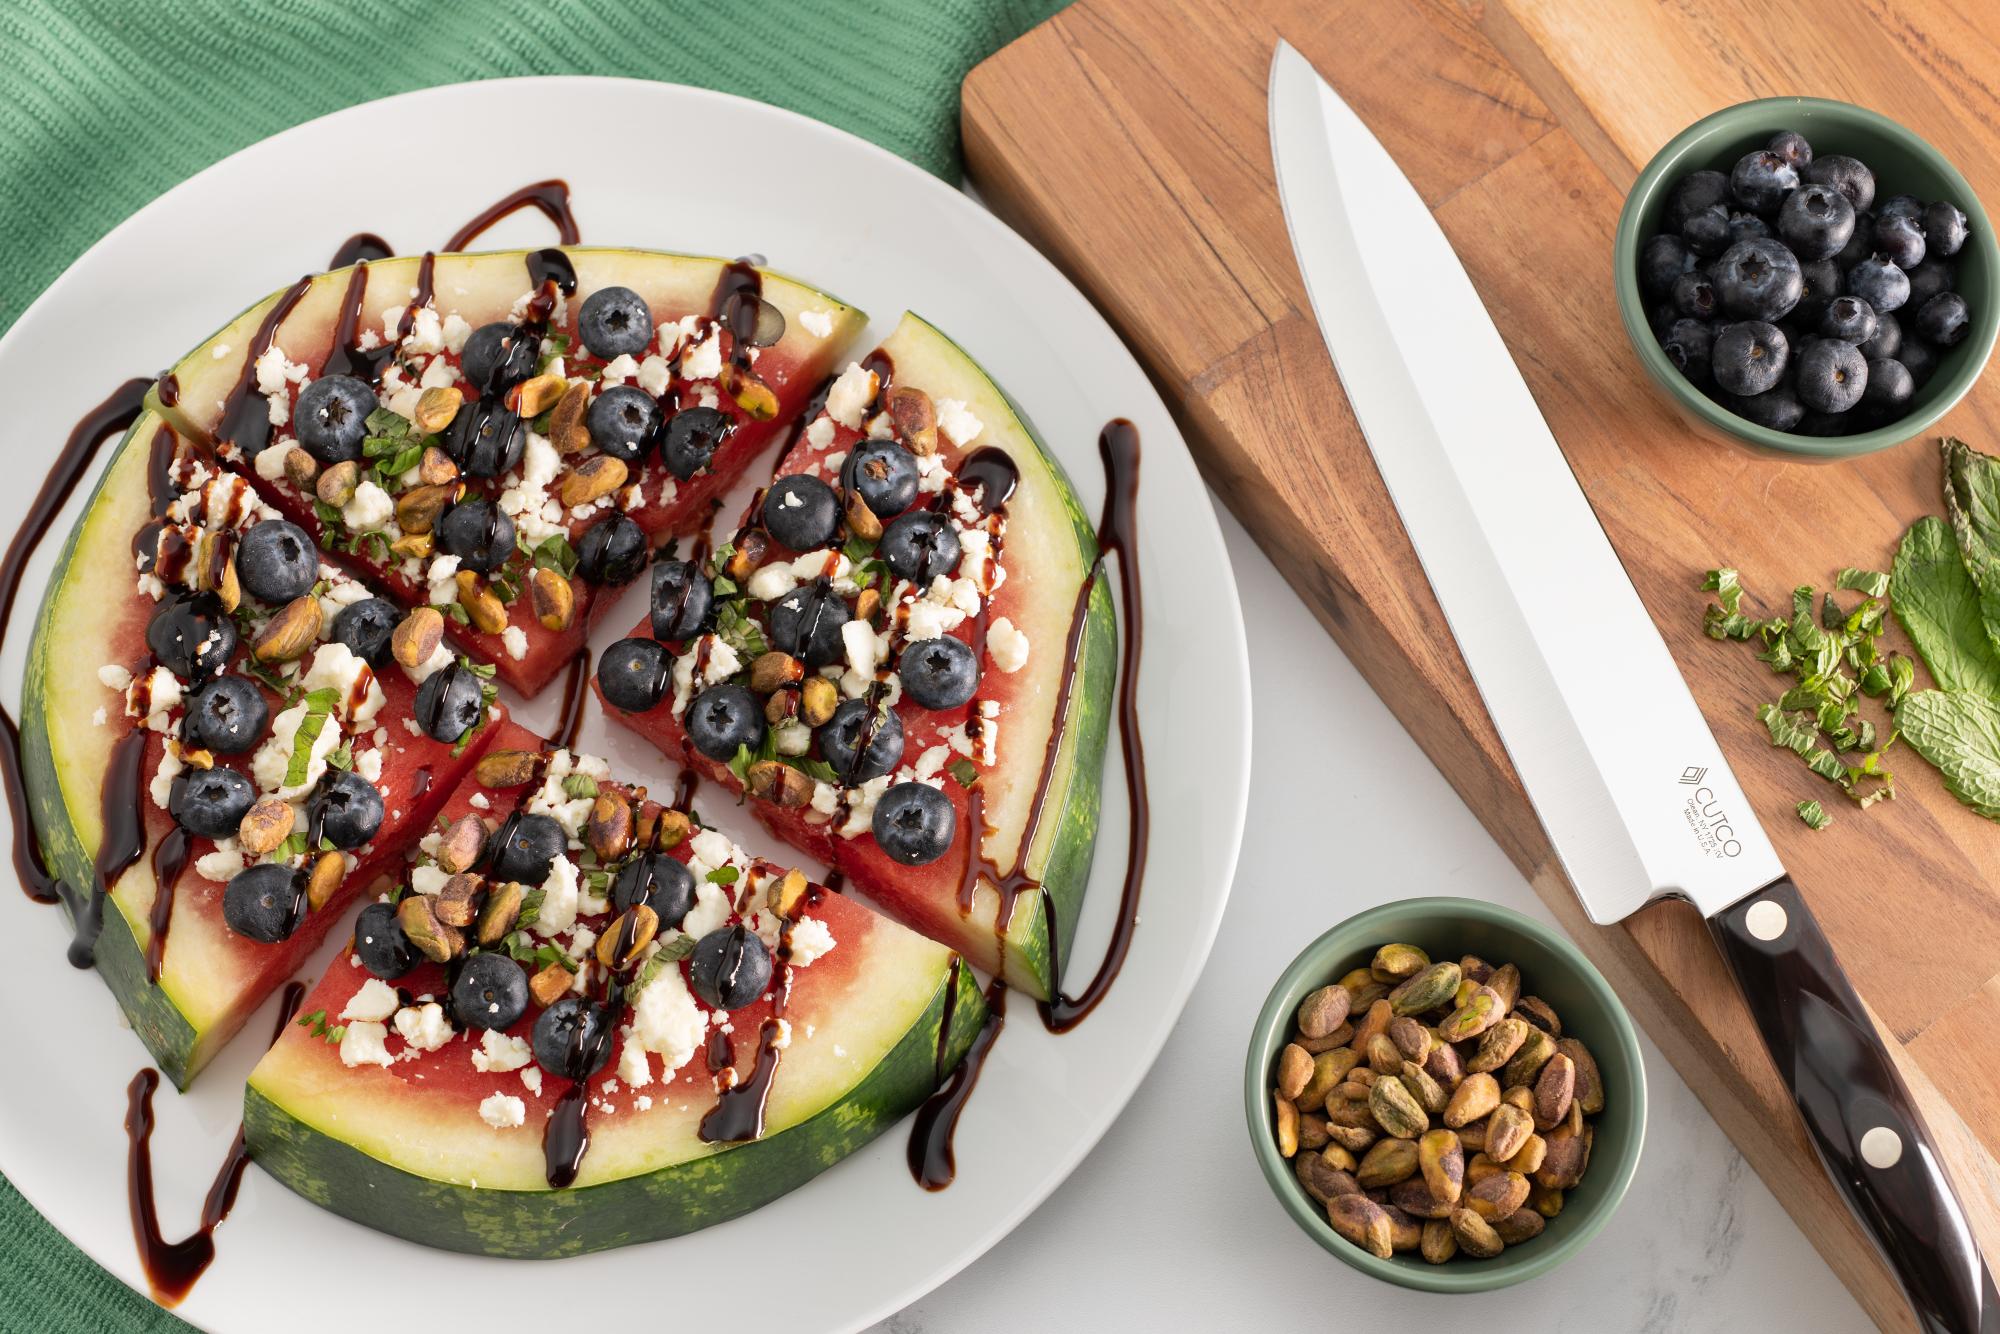 Watermelon Pizza With Blueberries, Feta, Mint and Balsamic